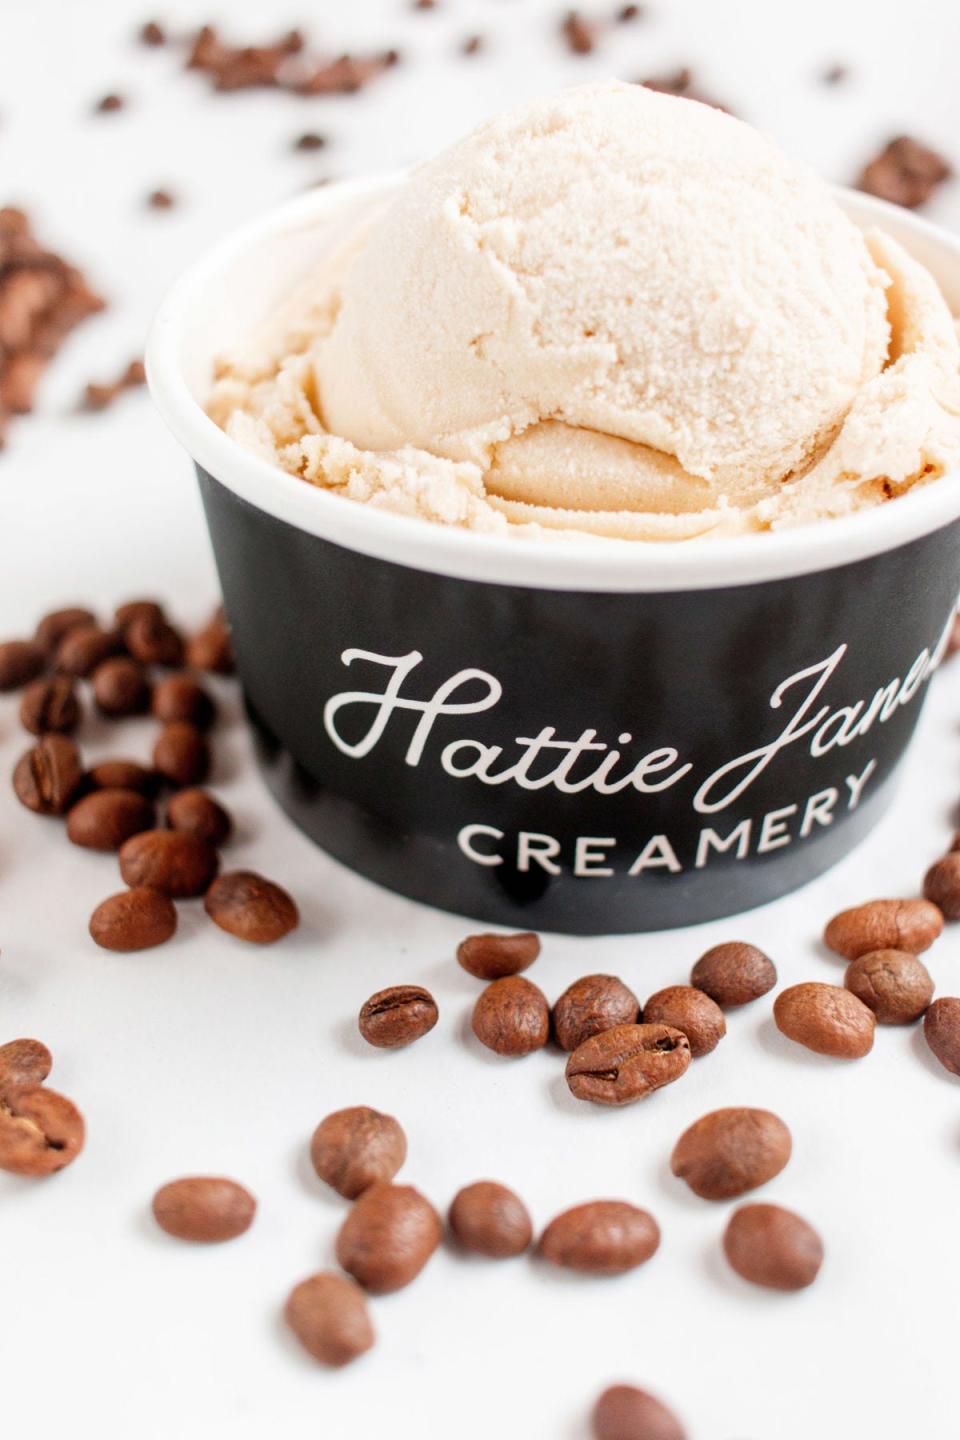 Grab a scoop or two at Hattie Jane's Creamery this Sunday as the business celebrates Eat Ice Cream for Breakfast Day.